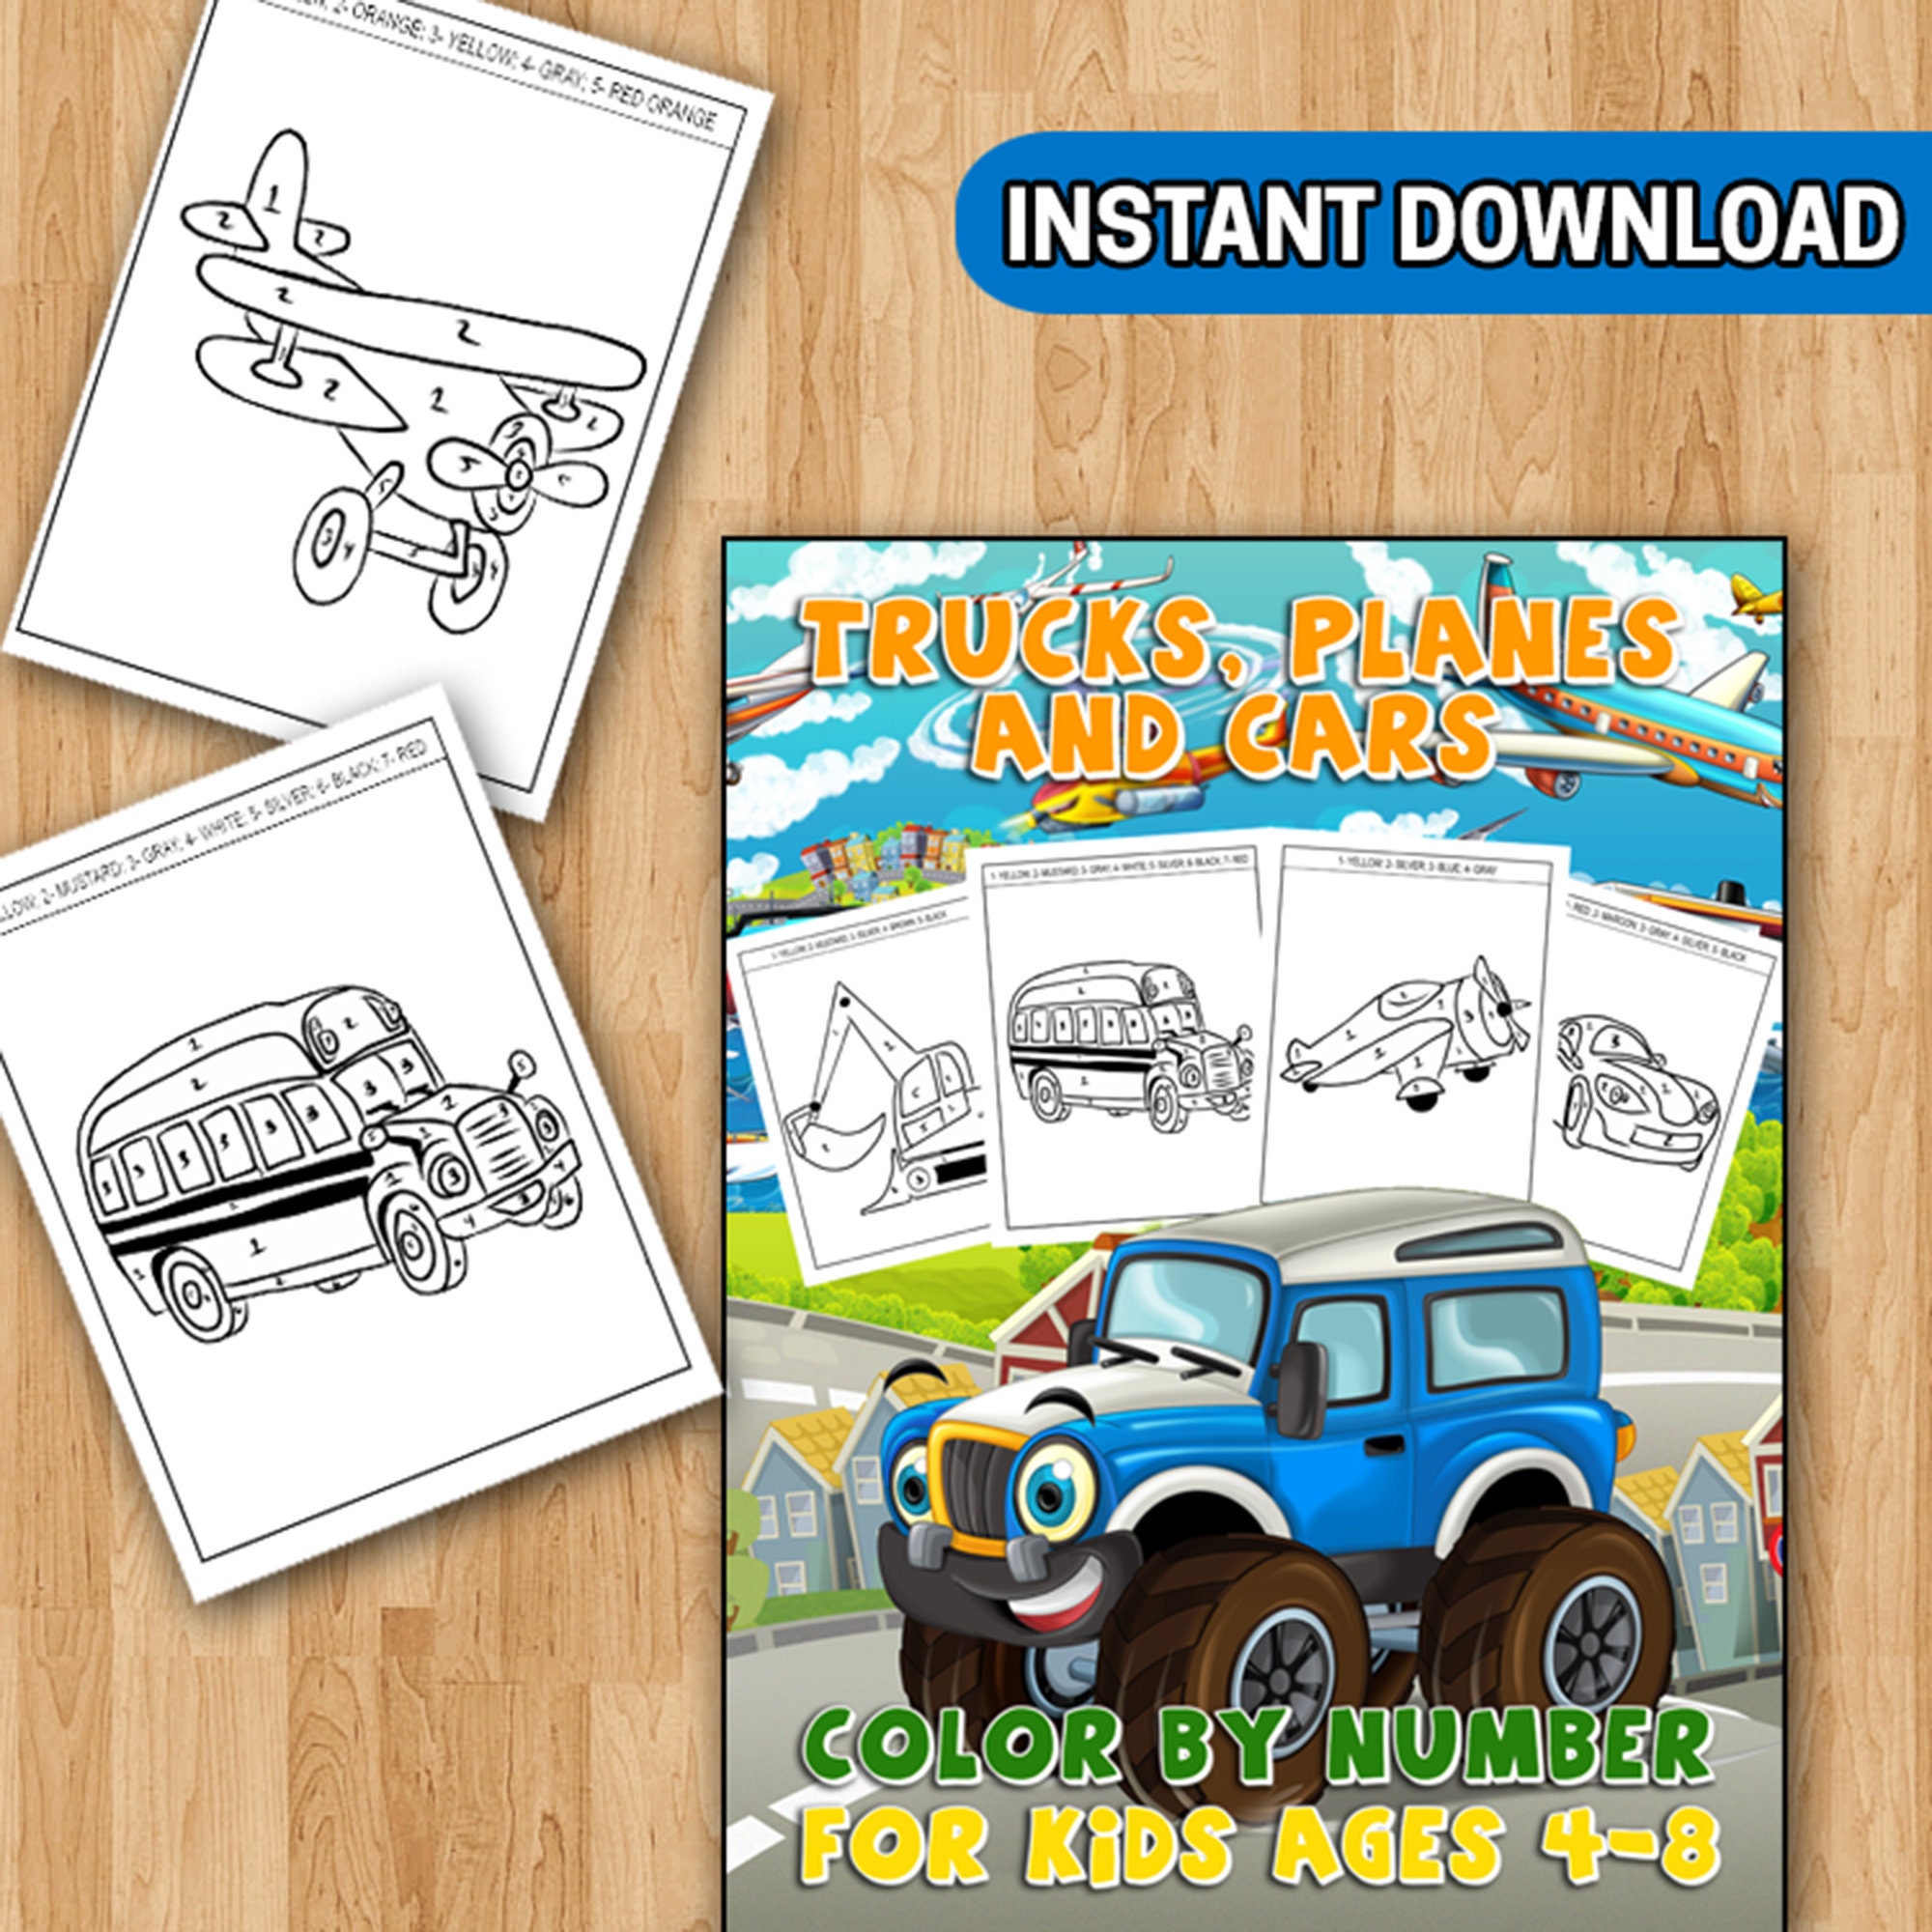 Planes, Trucks, Cars Coloring Book For Kids Ages 4-8: Vehicles